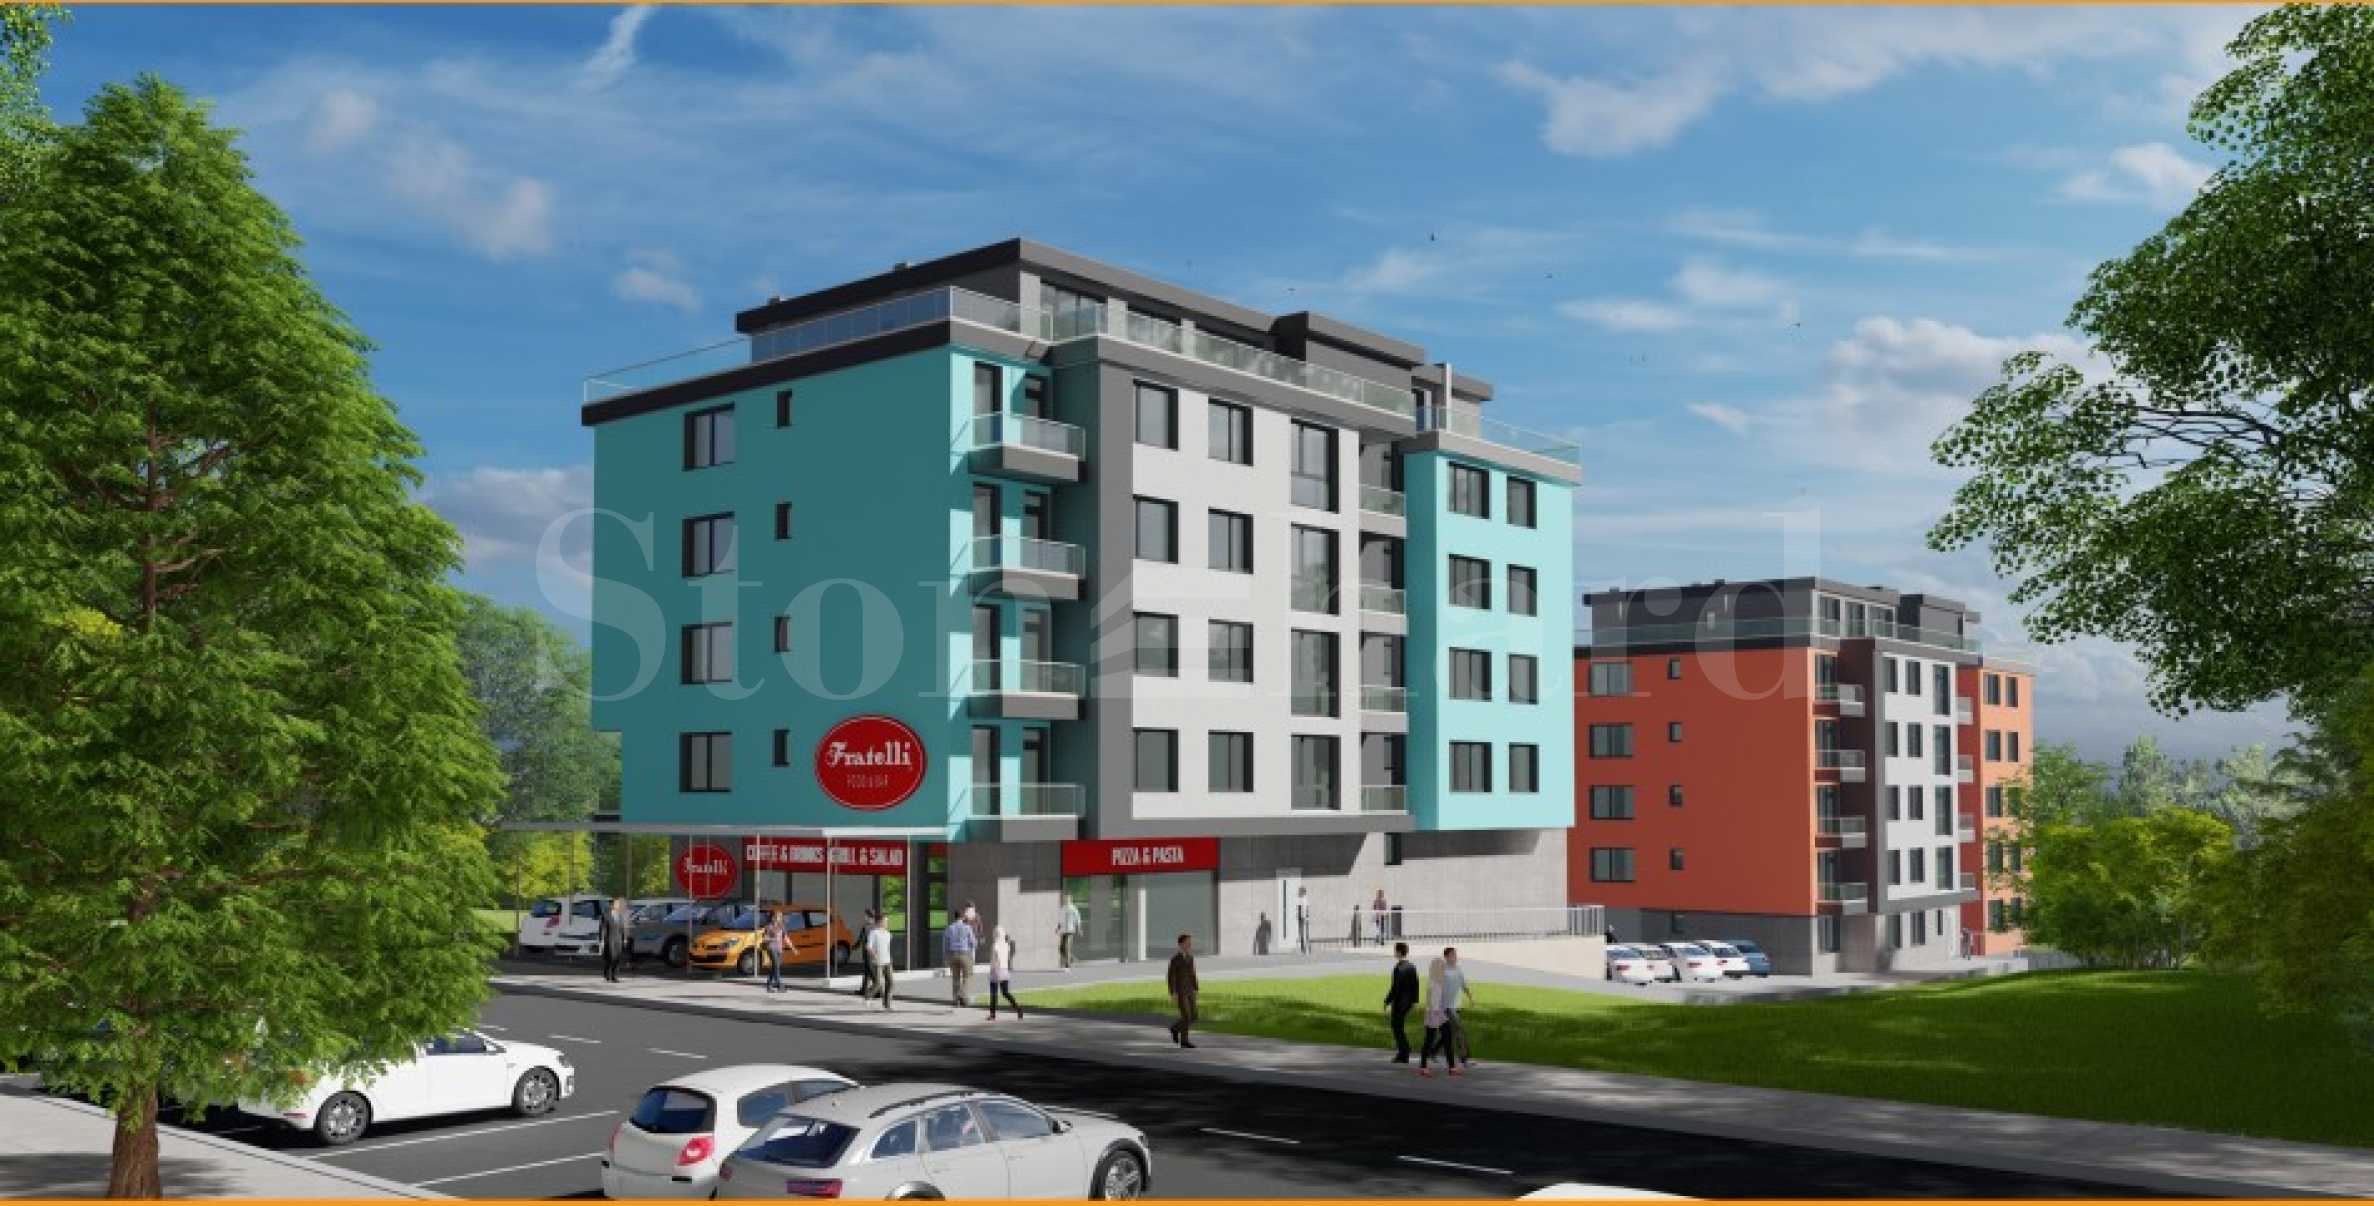 Advance sales! Apartments in a new complex next to the park1 - Stonehard